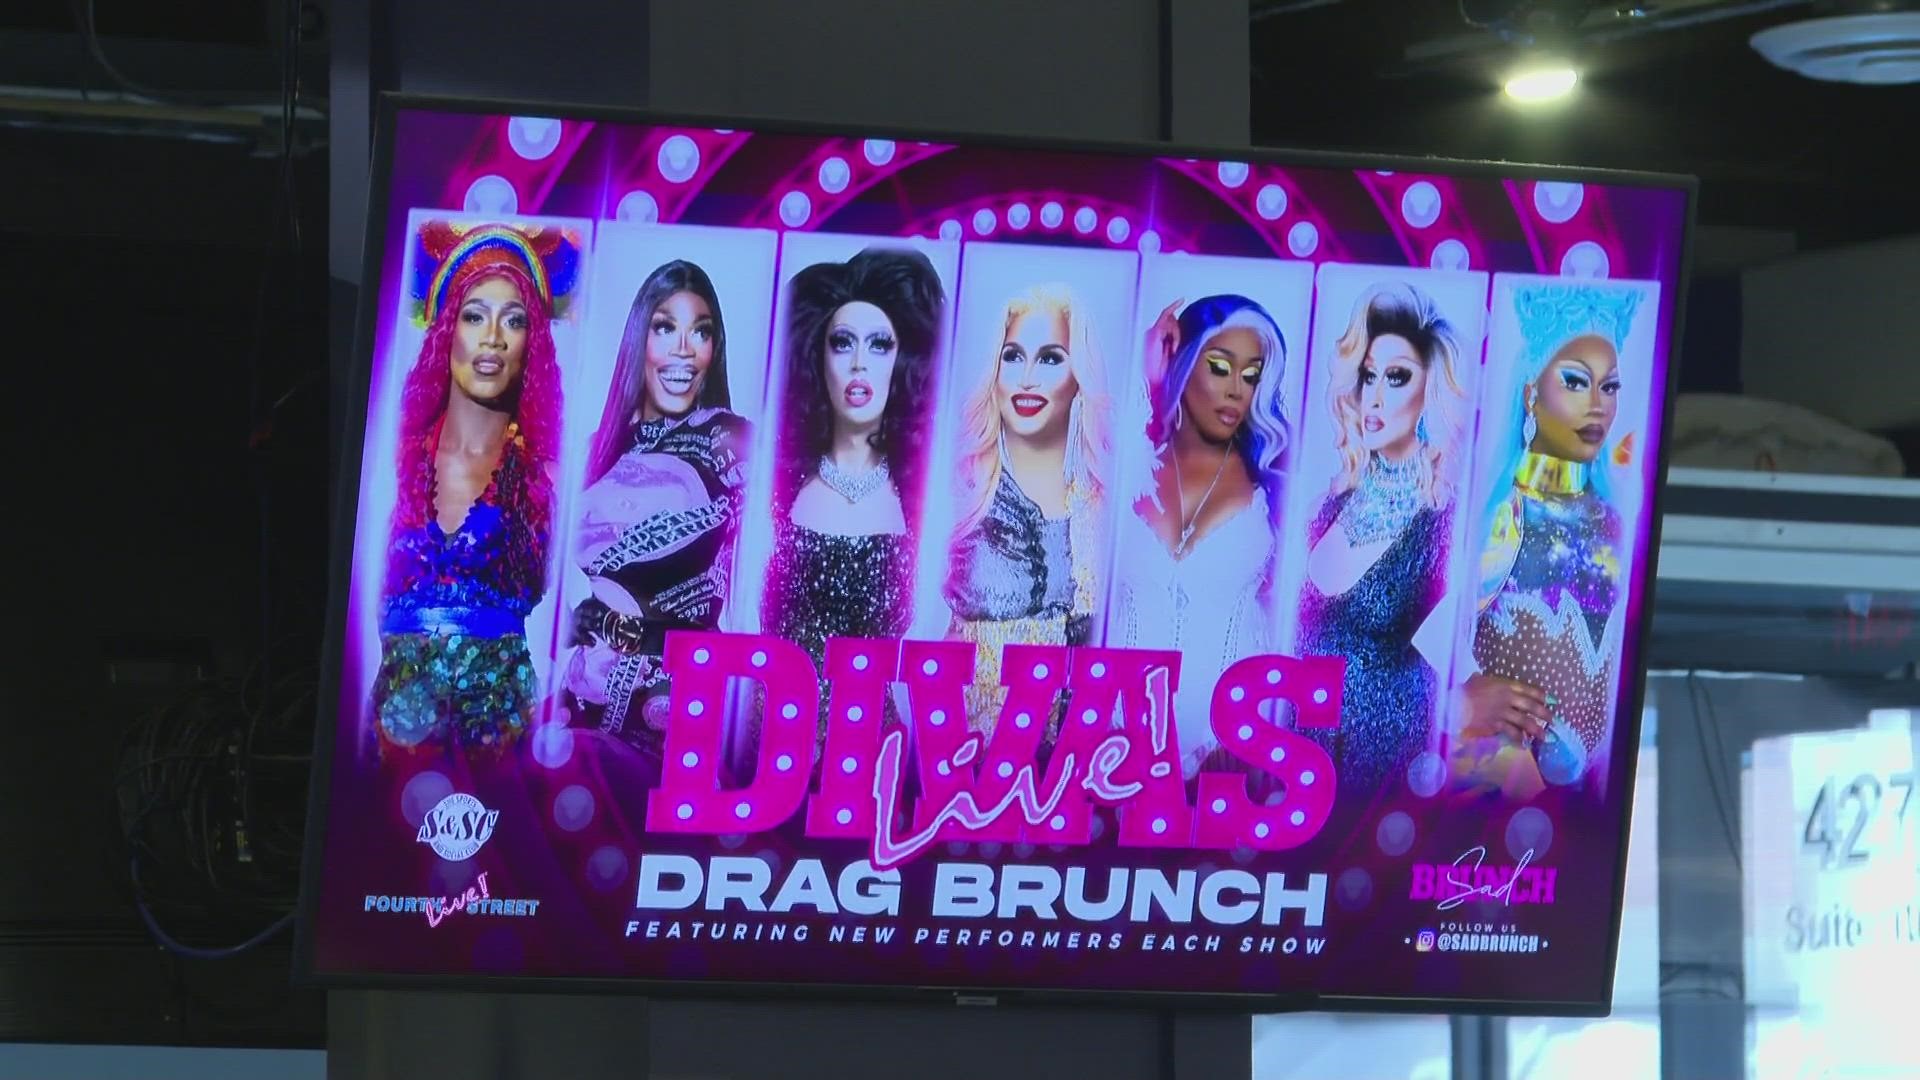 The Sports and Social Club in downtown Louisville relaunched its brunch with a drag show. The entertainers say taking up space is important as restrictions loom.